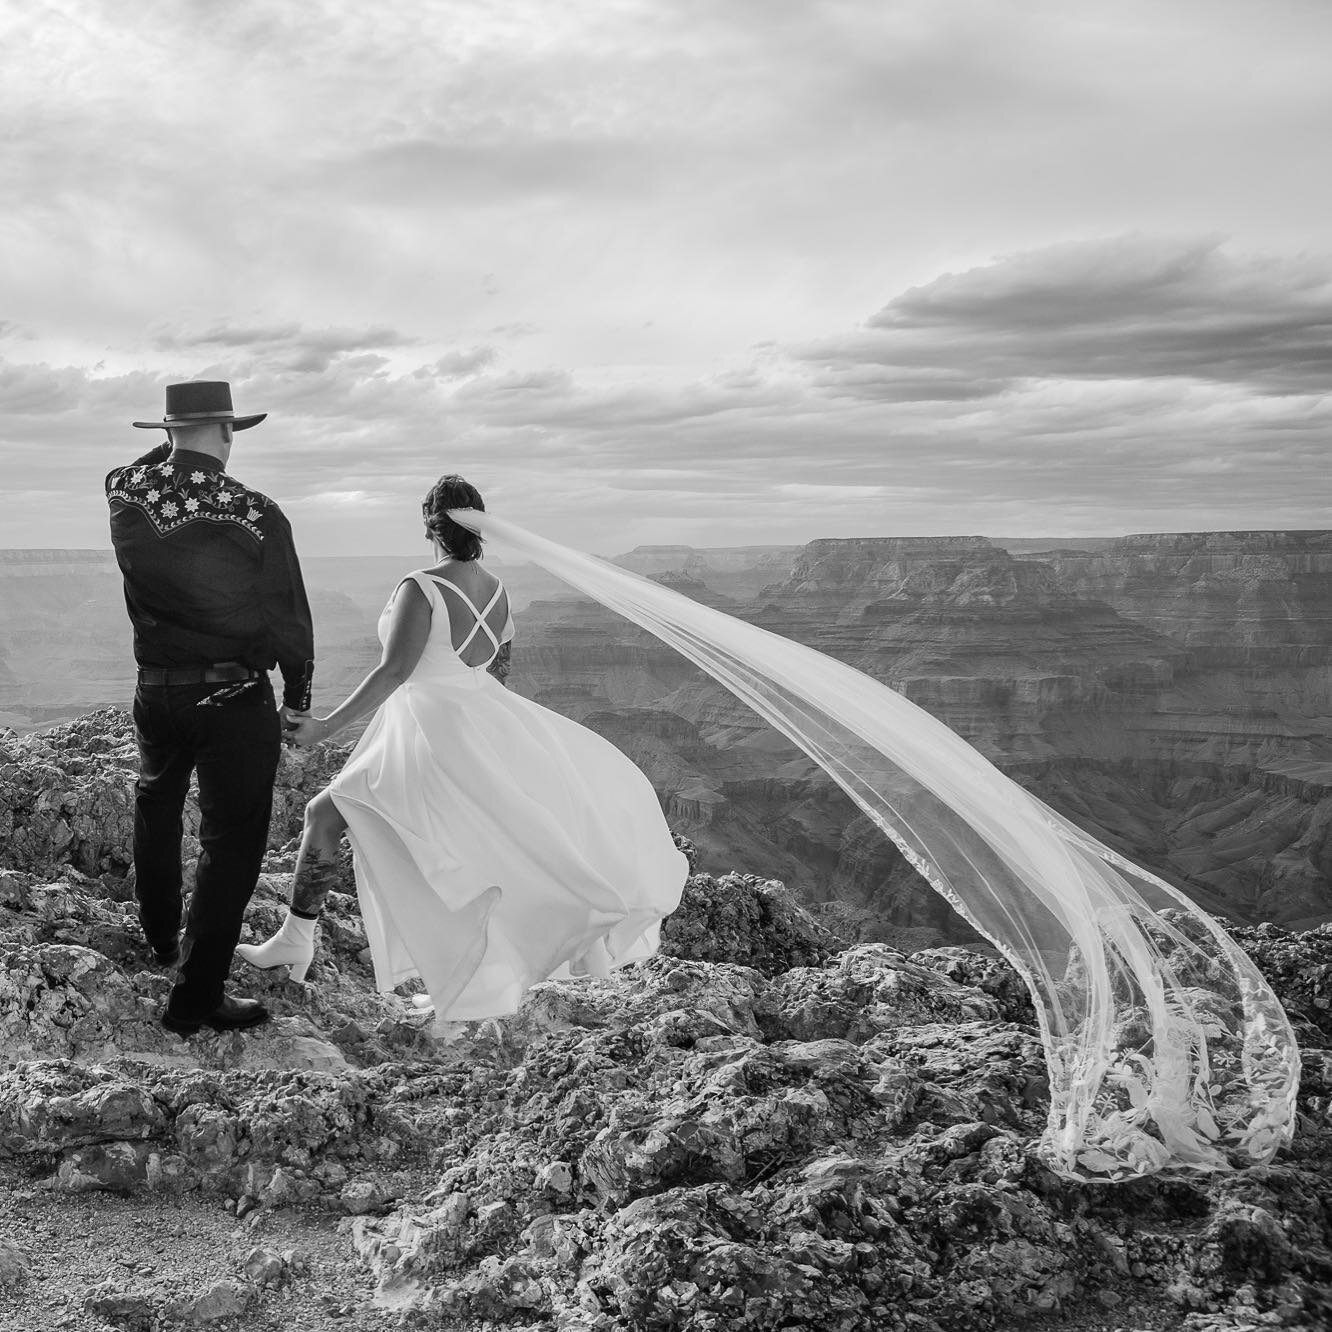 Could there be a place more grand than the Grand Canyon to say &lsquo;I do&rsquo;? Congratulations to Brian &amp; Julia! You picked an epic spot to begin your life together as one. 🤍